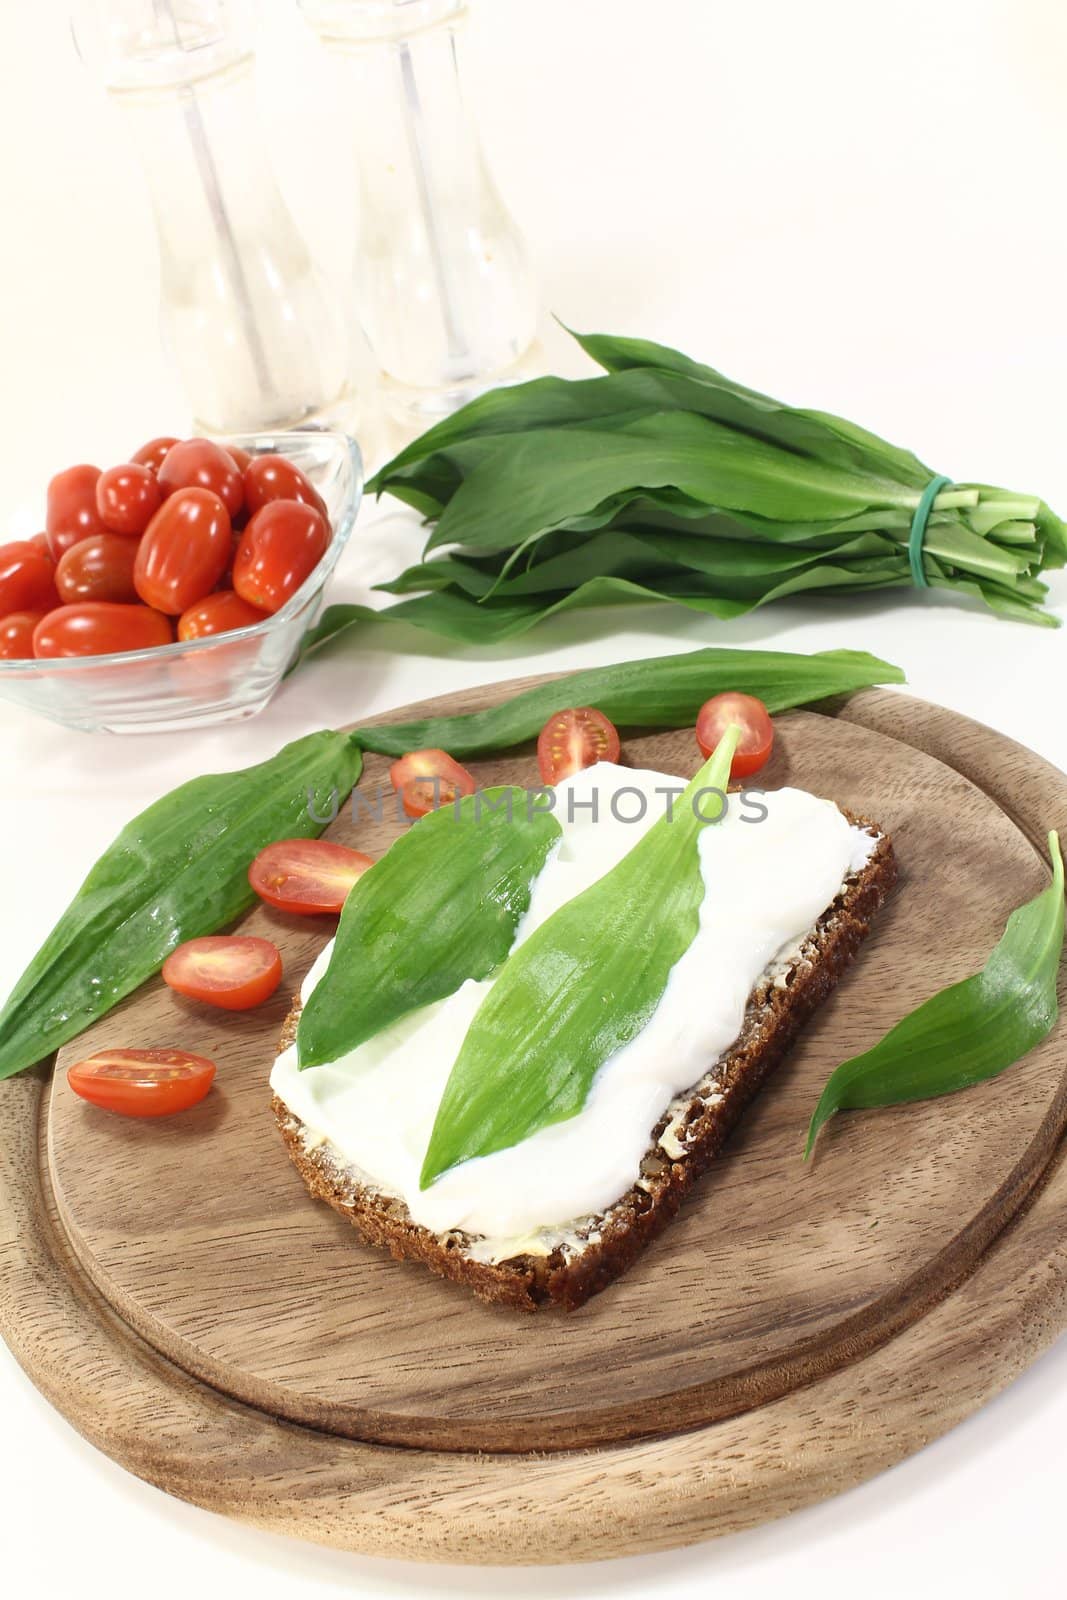 Slice of bread with fresh cottage cheese, ramson and chopped tomatoes on a light background